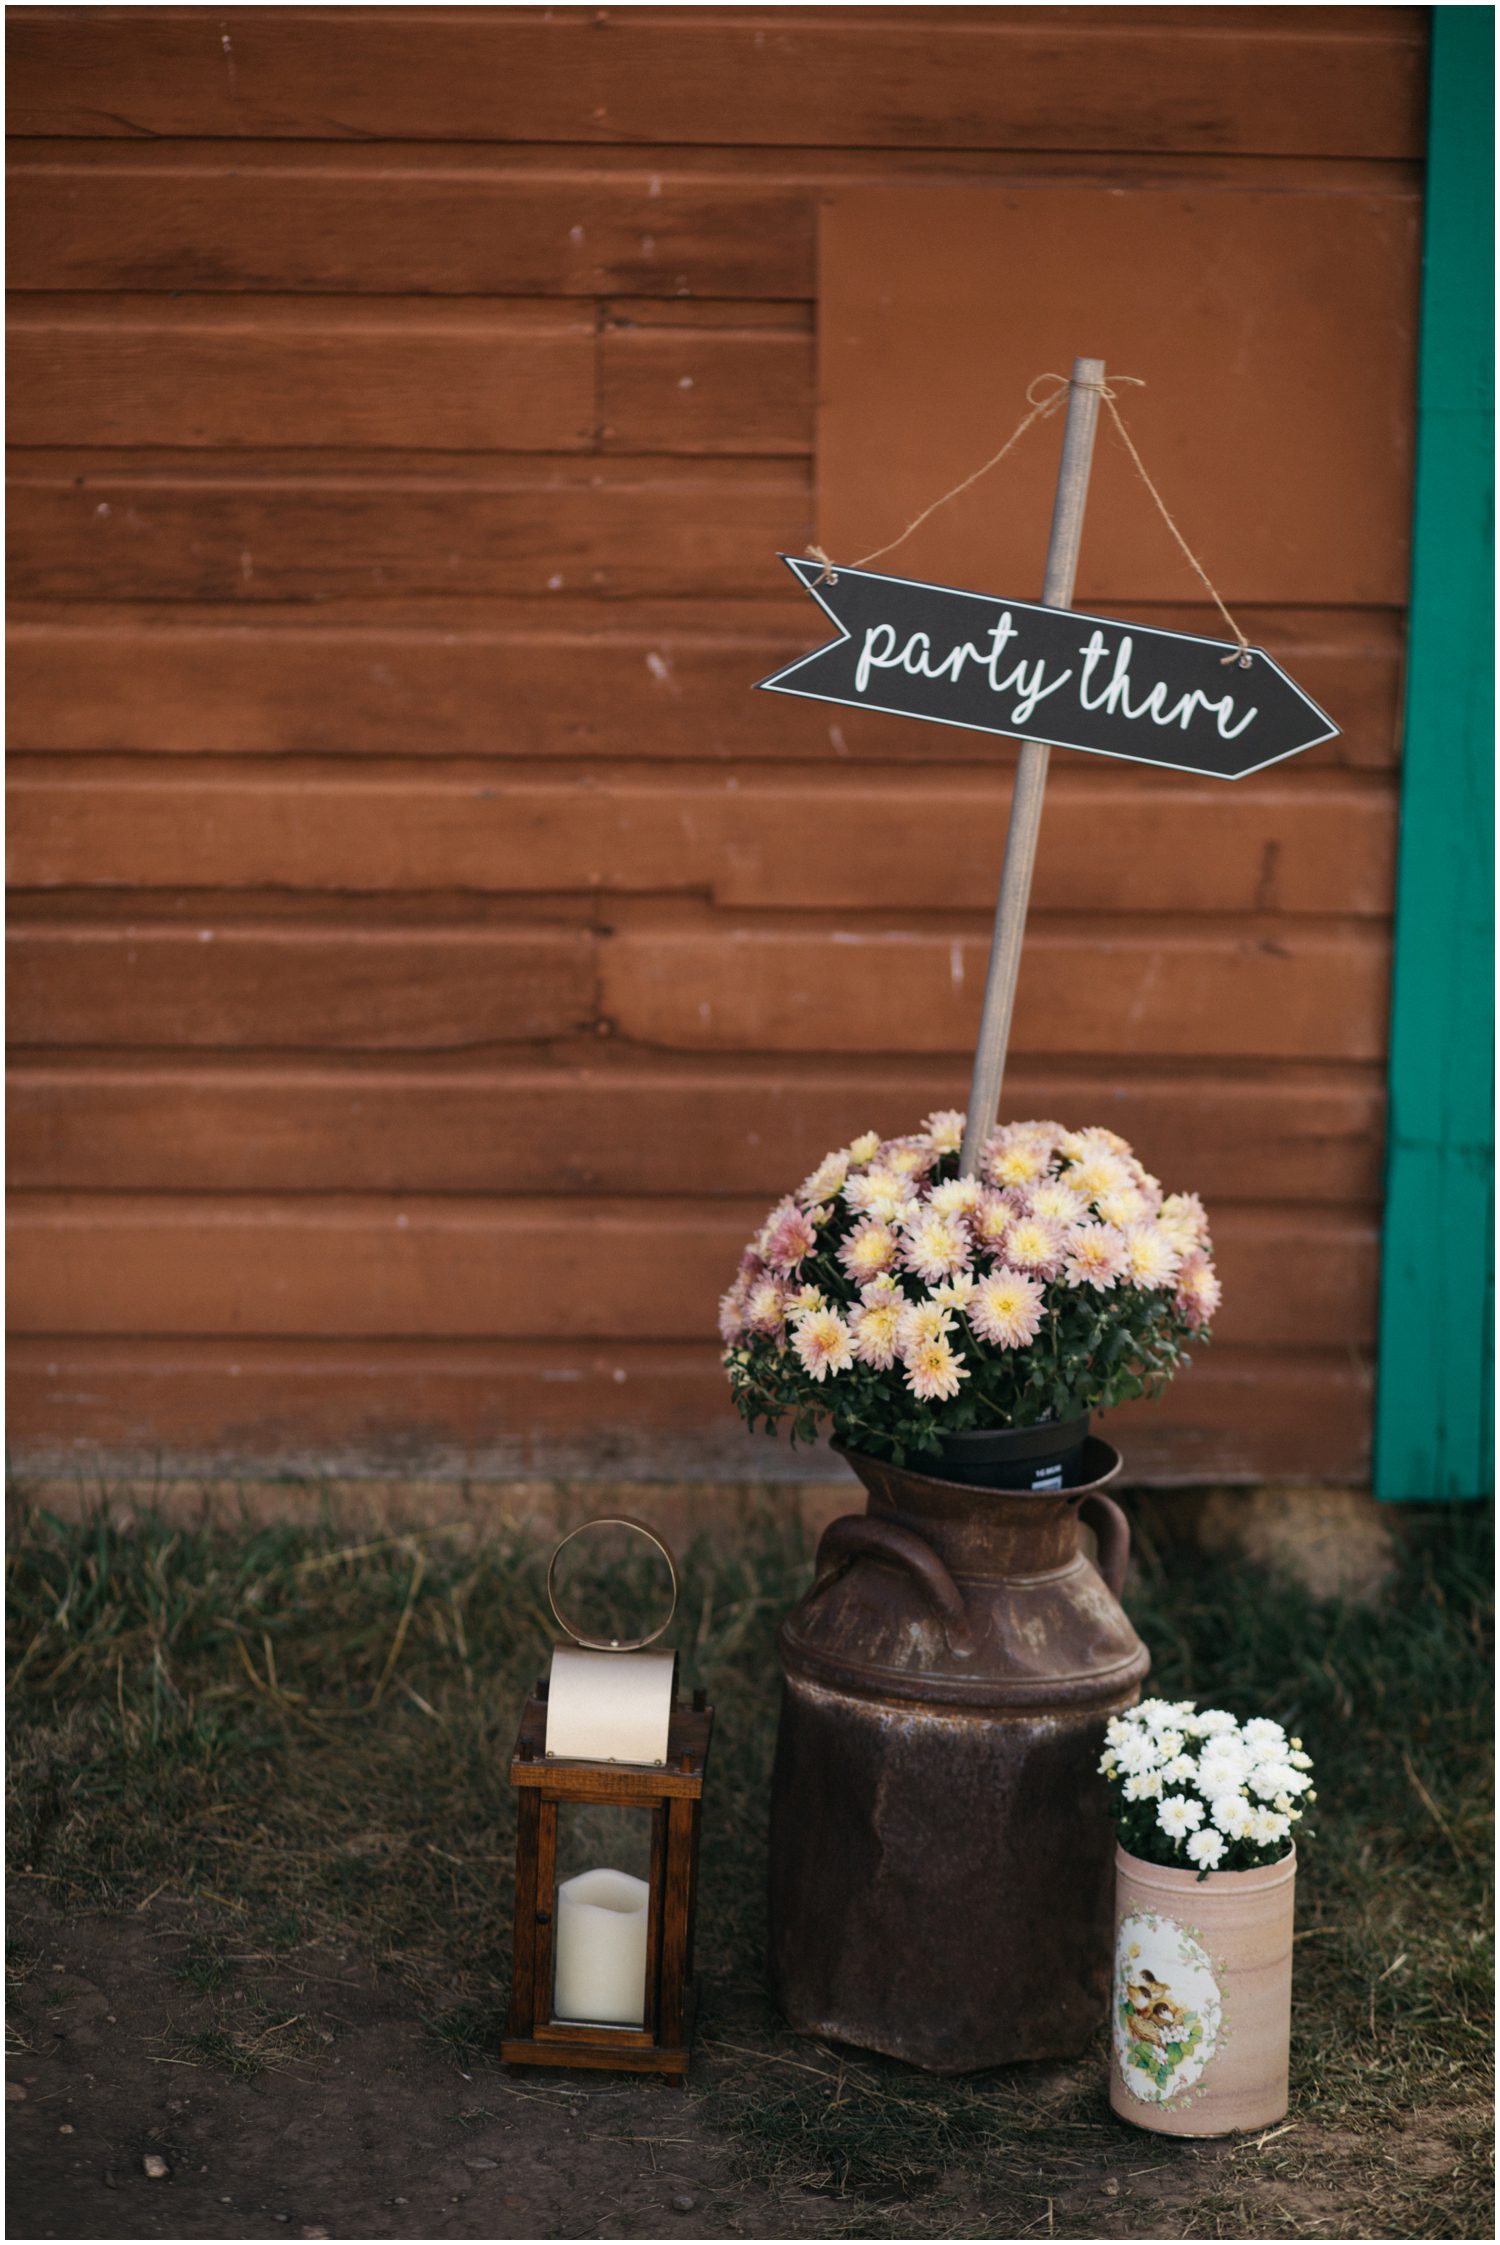 Party there wedding sign, Wedding Reception Sign, Cocktail hour sign, Wedding decorations,Double A Barn Wedding Photos, Double A Barn Grand Lake Colorado, AA Barn Grand Lake Colorado, Double A Barn Wedding Photos, Grand lake Wedding Photographer, Colorado Wedding Photographer, Boho Wedding inspiration, Rustic wedding inspiration, Vintage Wedding inspiration